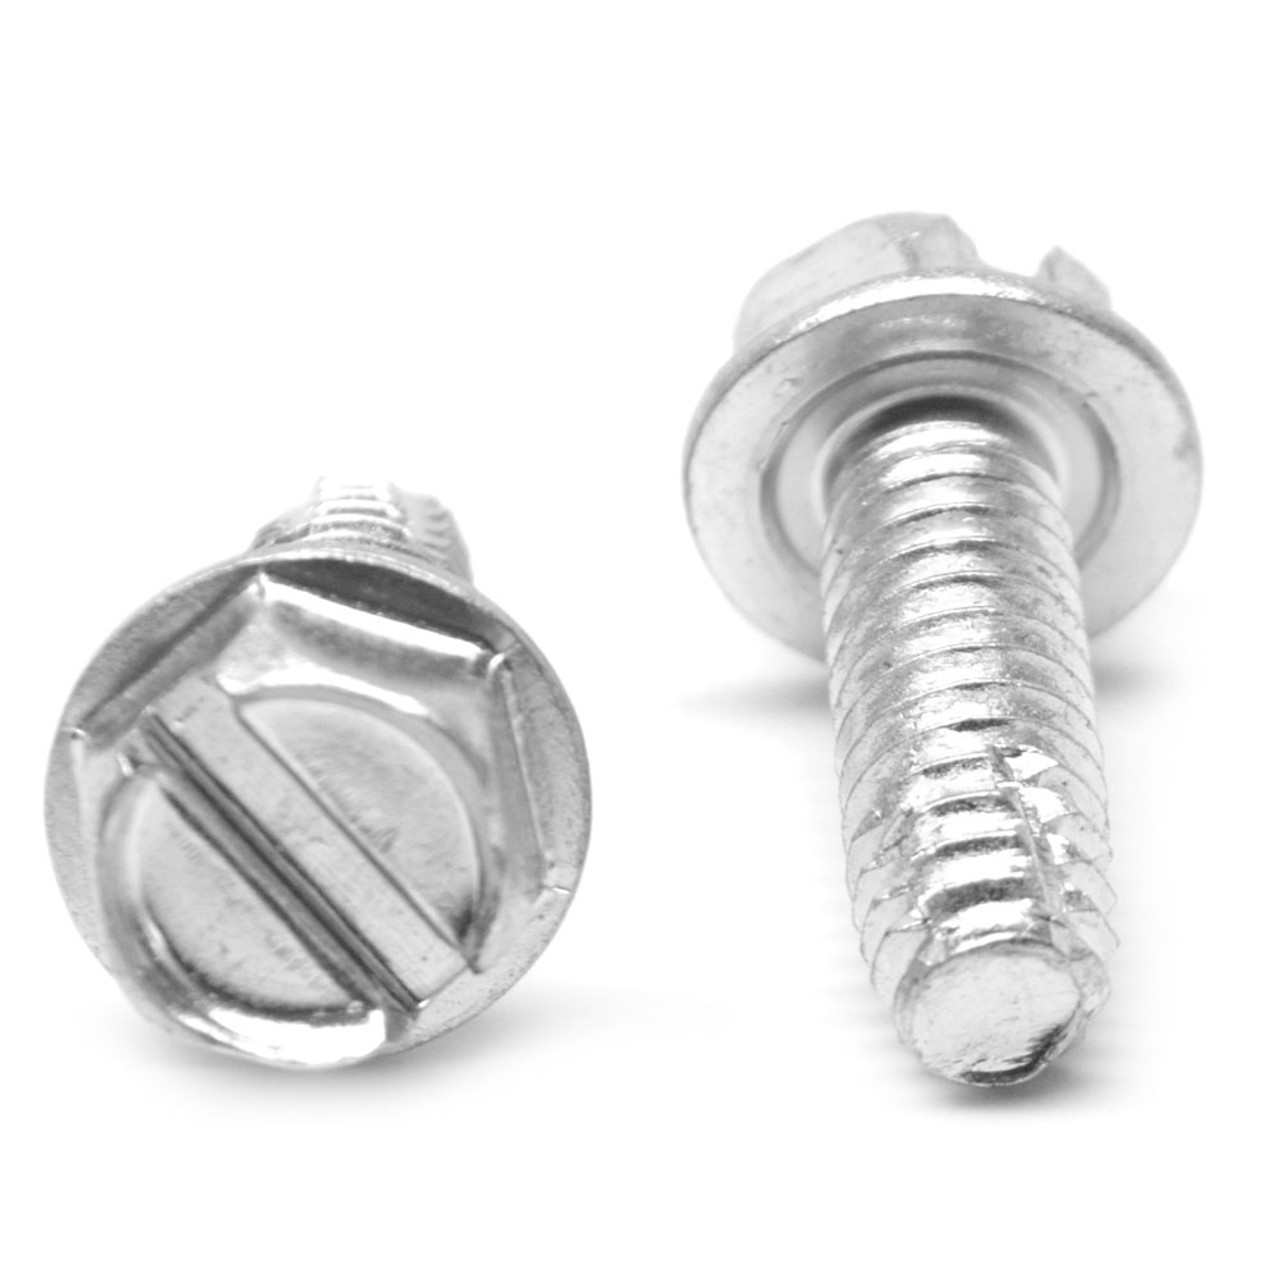 #10-32 x 1/2" (FT) Fine Thread Thread Cutting Screw Slotted Hex Washer Head Type F Low Carbon Steel Zinc Plated